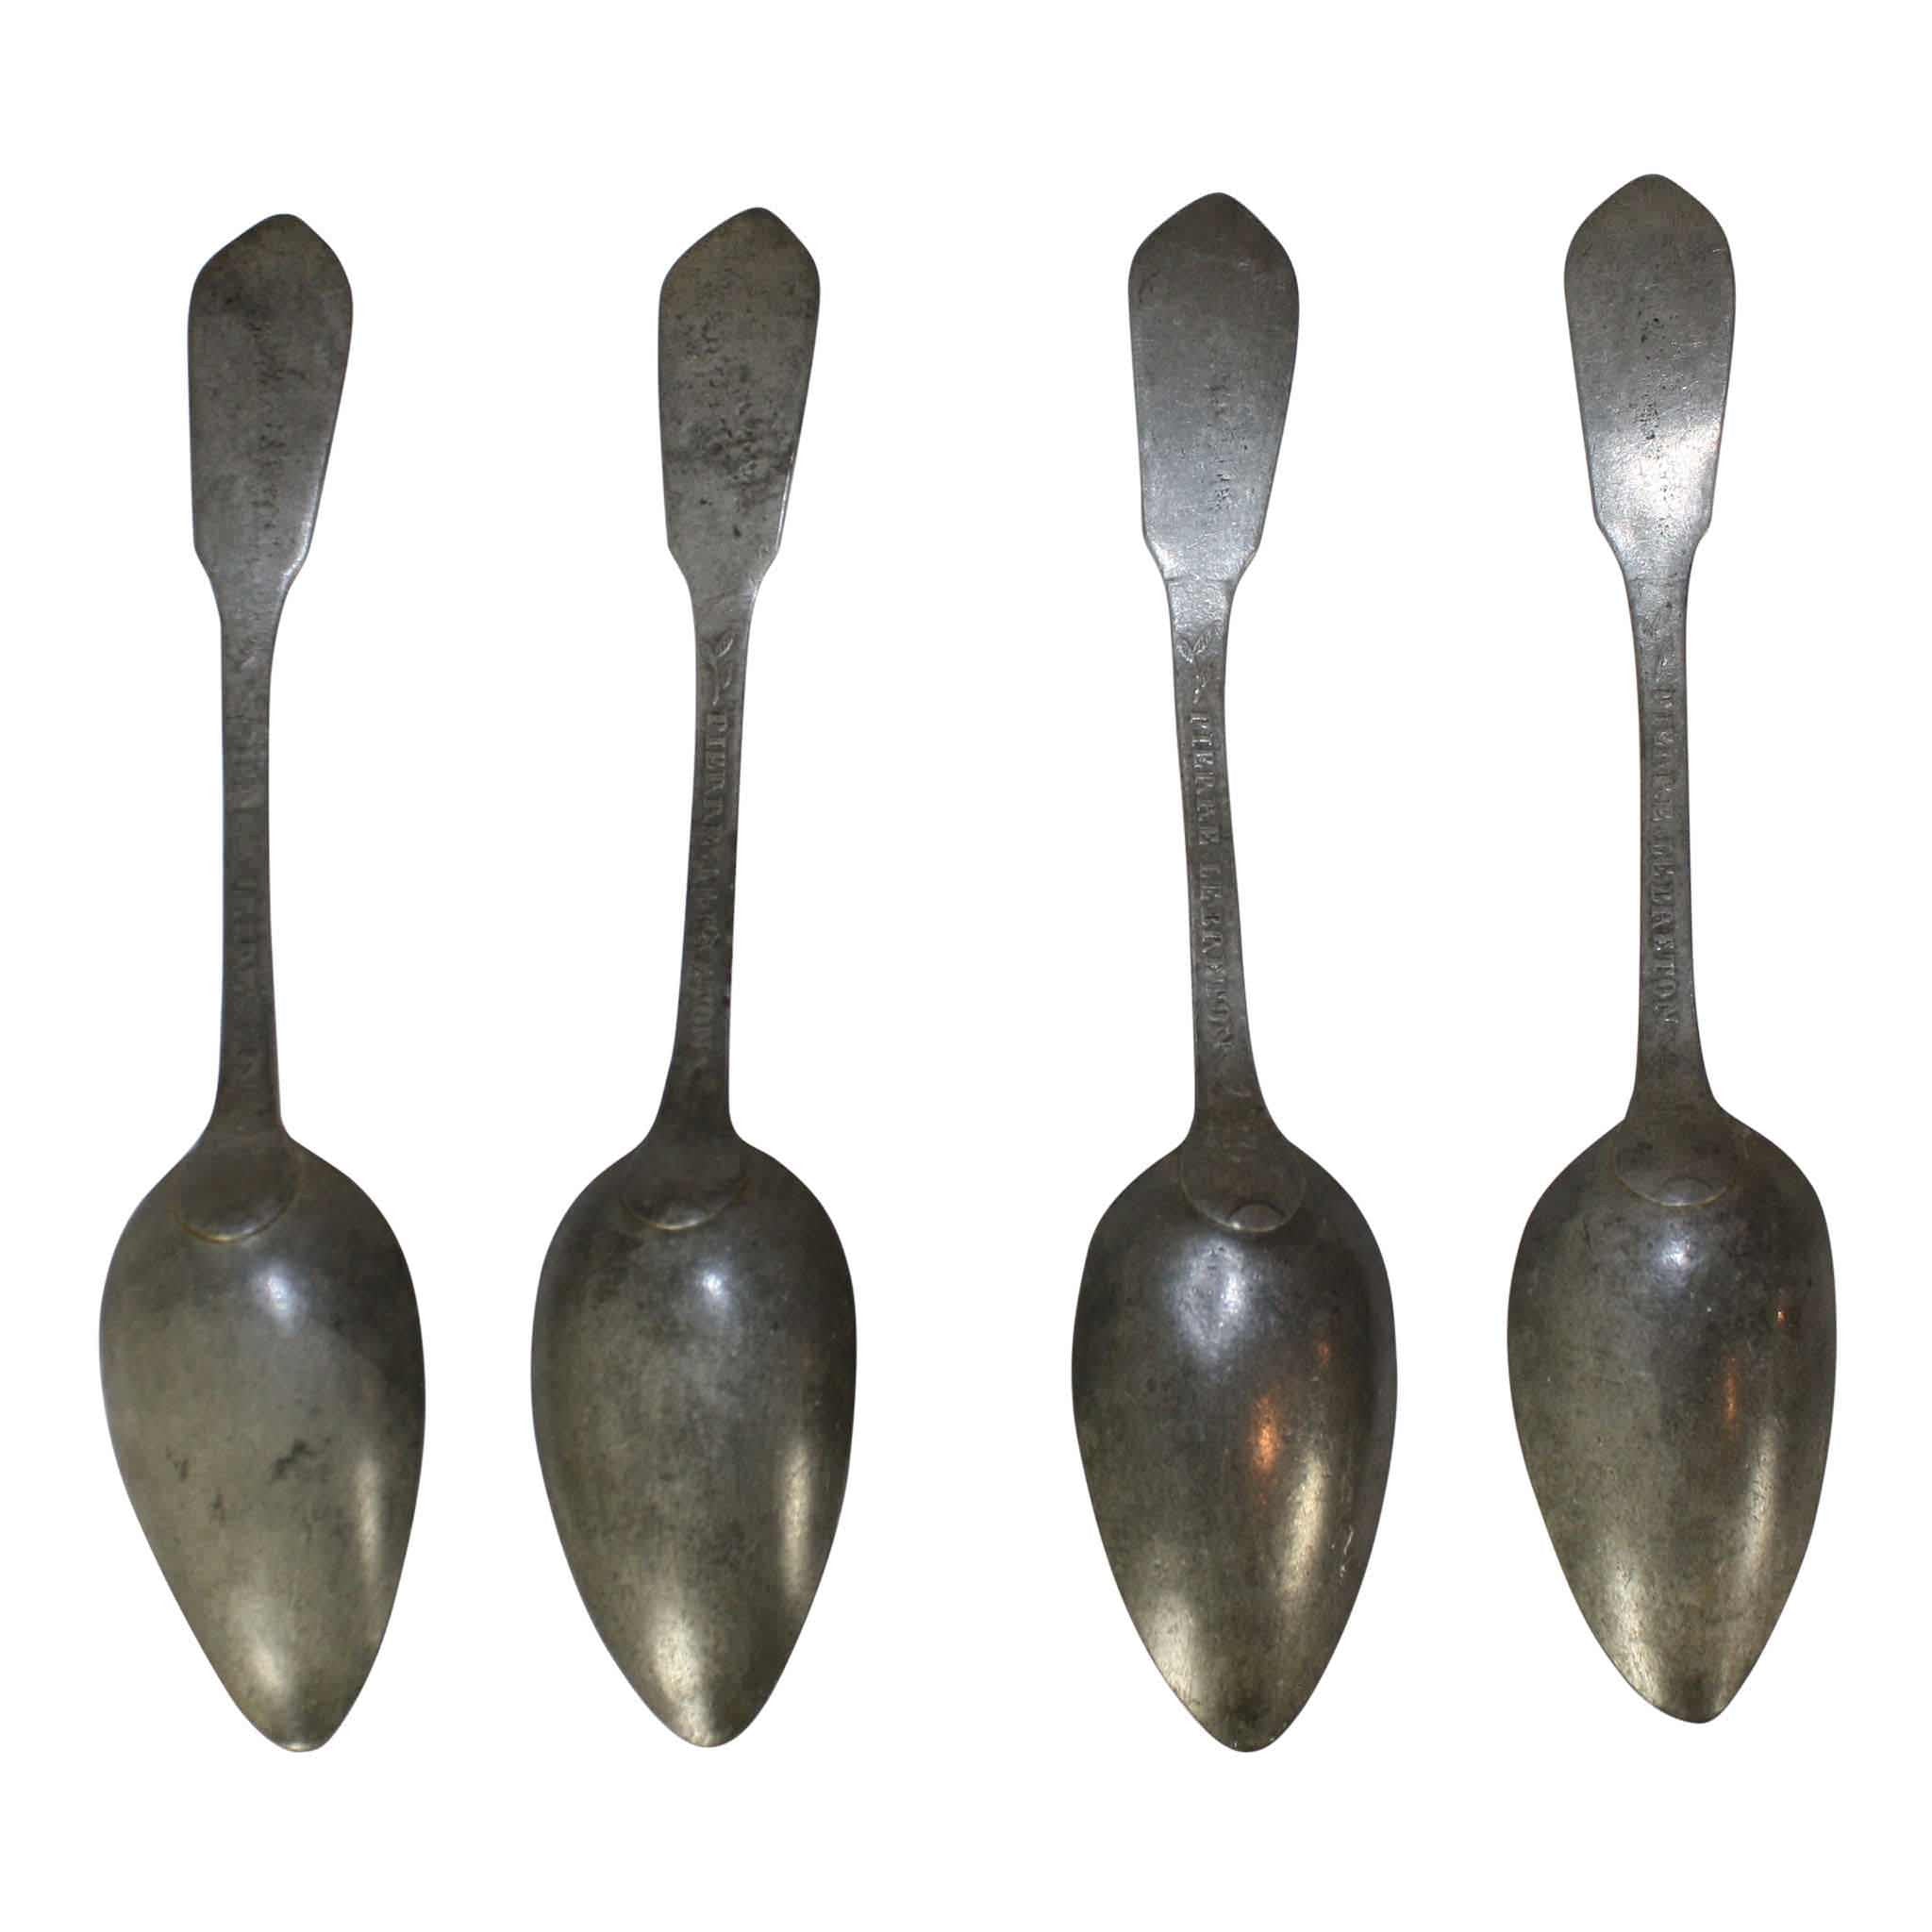 Four Pewter Spoons in Rack